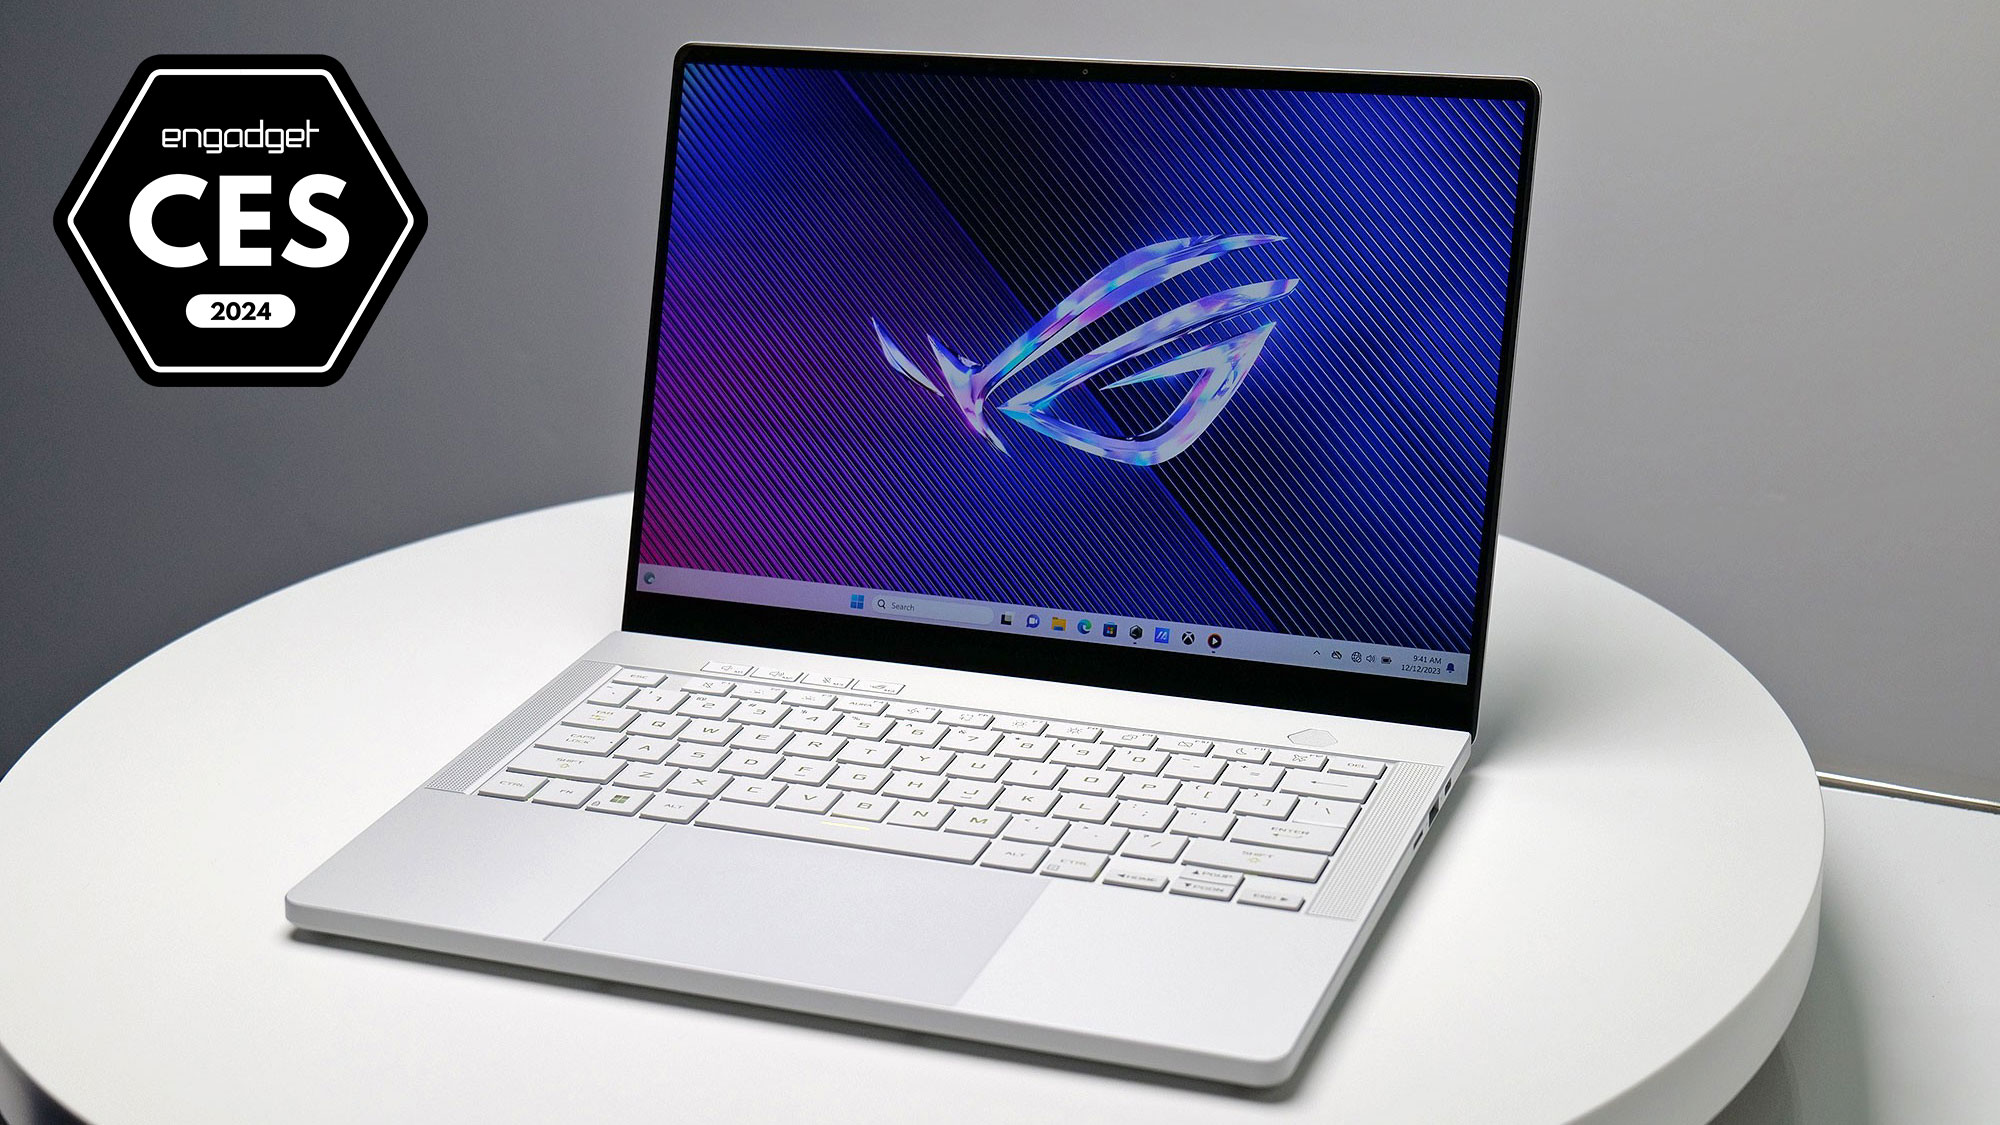 An image with a badge for Engadget Best of CES 2024 showing the product: ASUS ROG Zephyrus G14 laptop on a white table display at the event.
